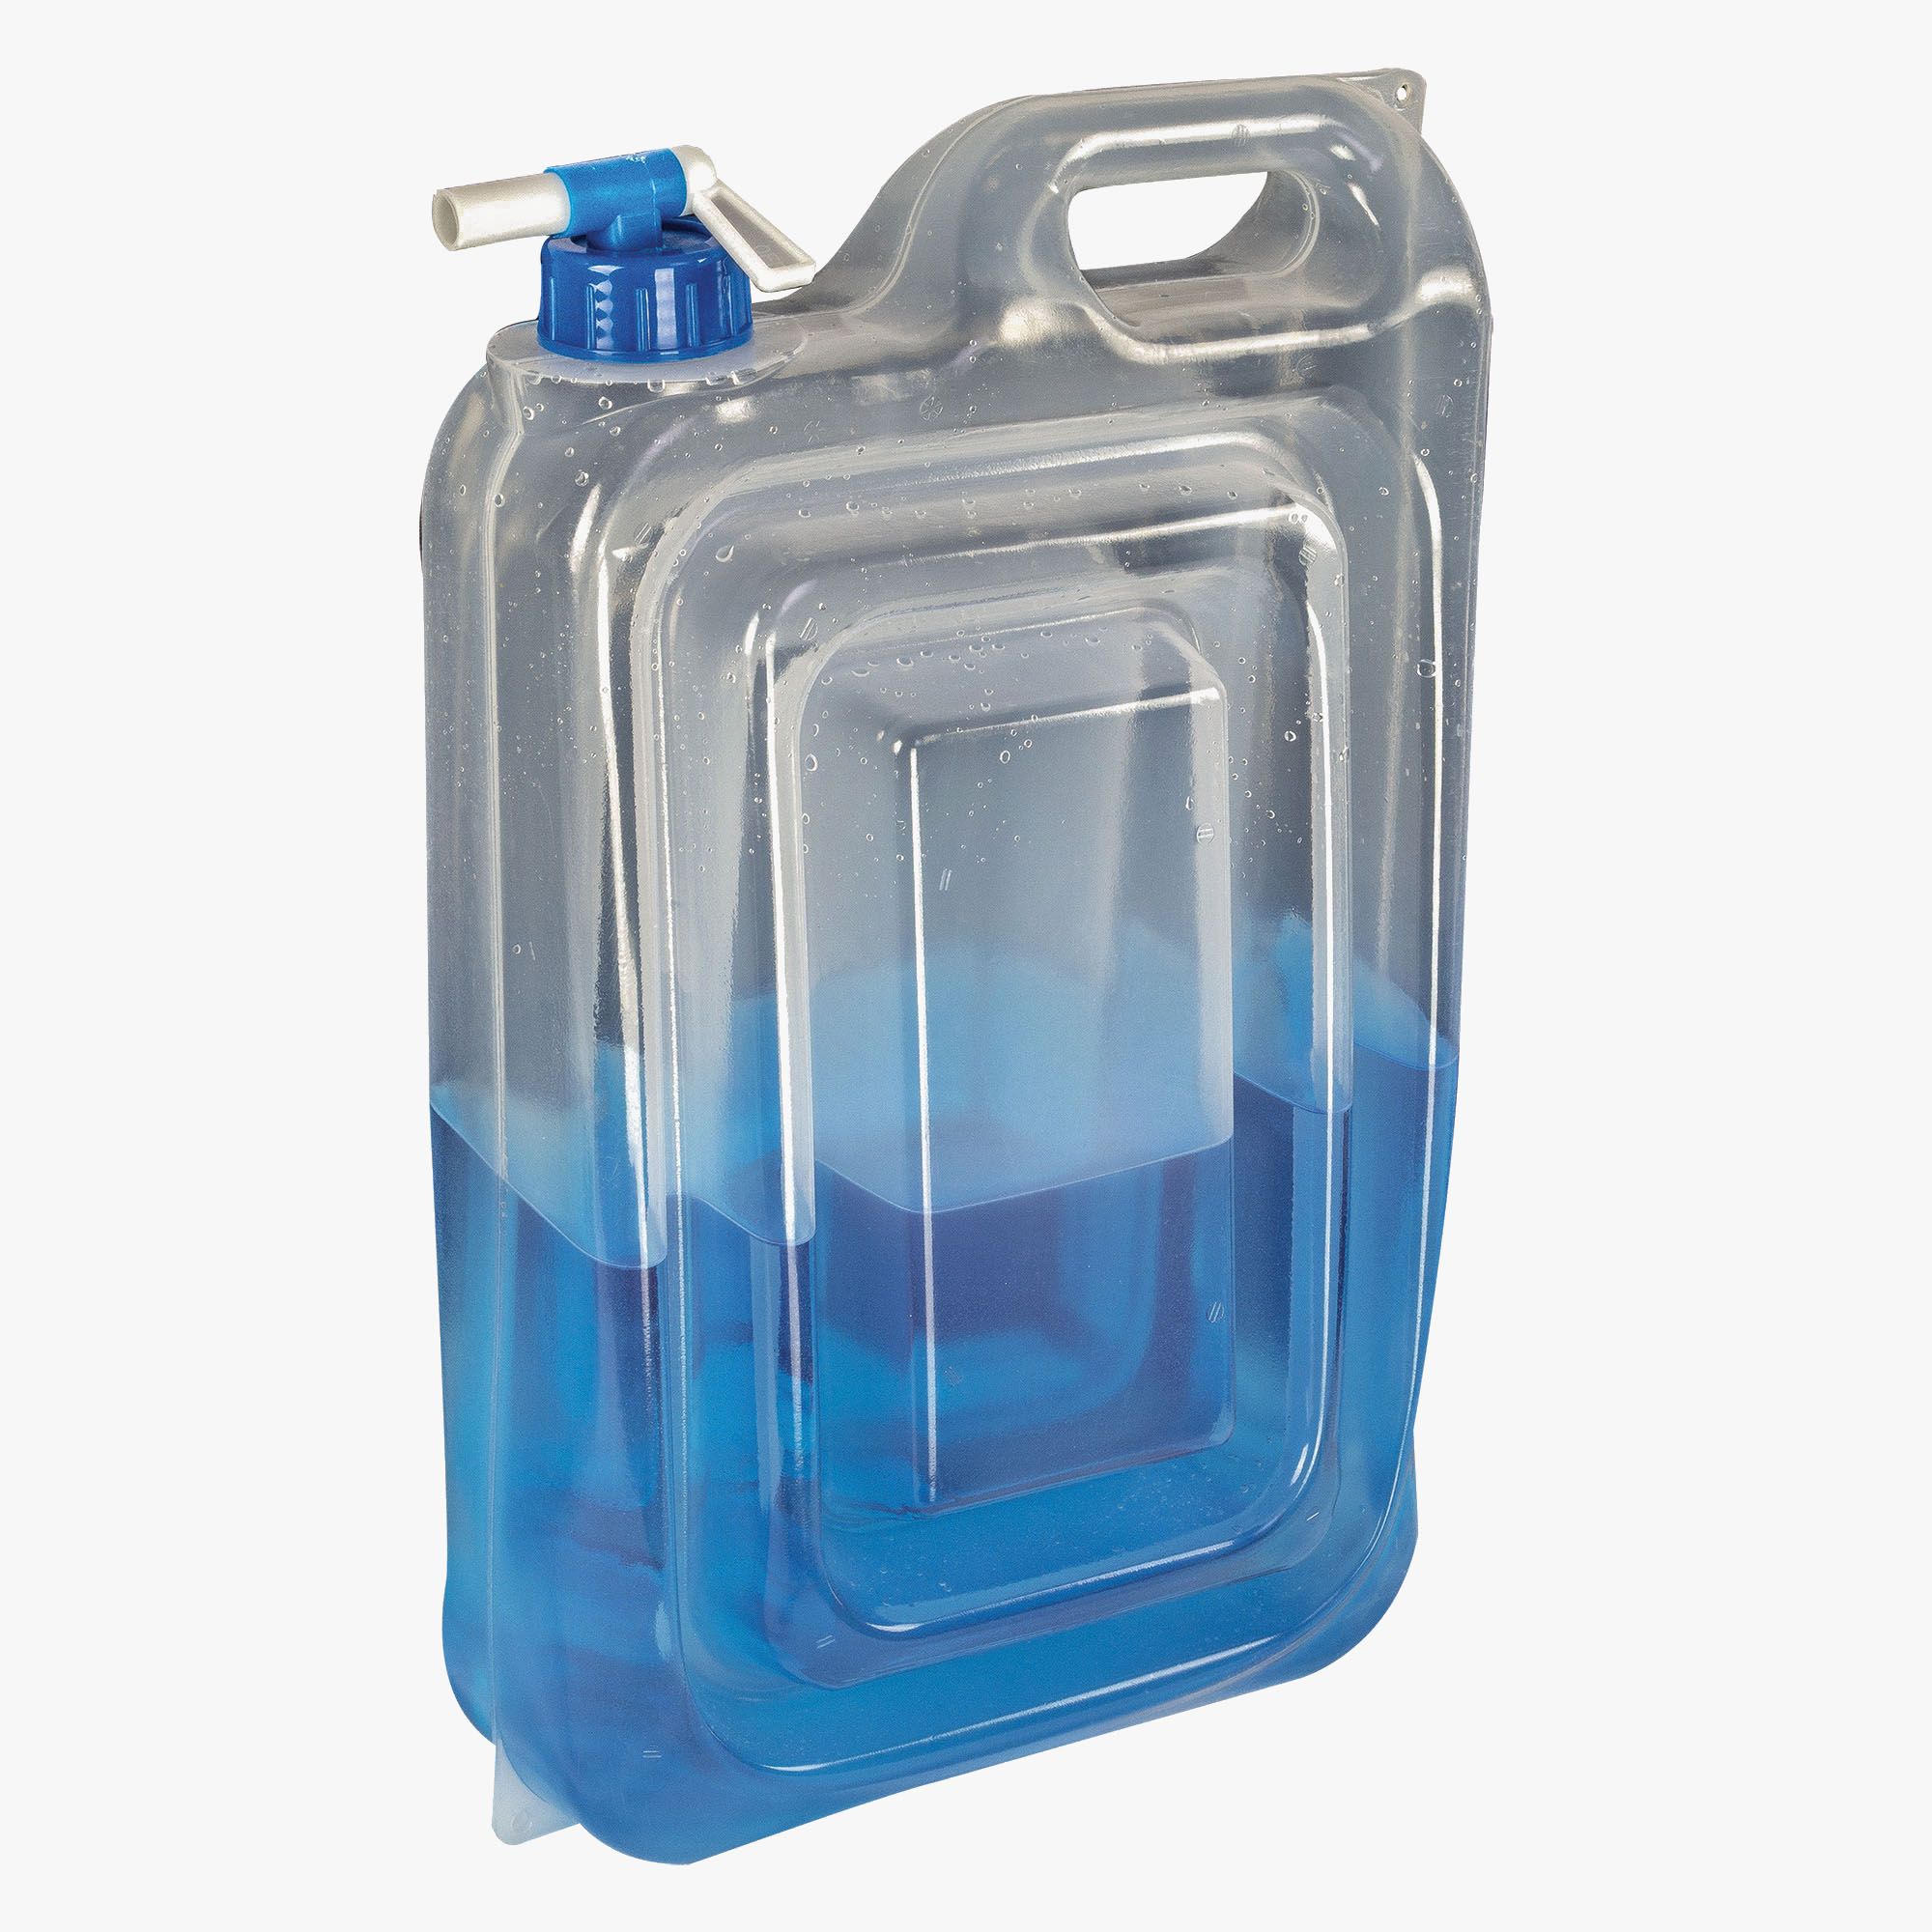 Highlander Accordion Water Carrier Folding Camping Water Carrier Plastic 